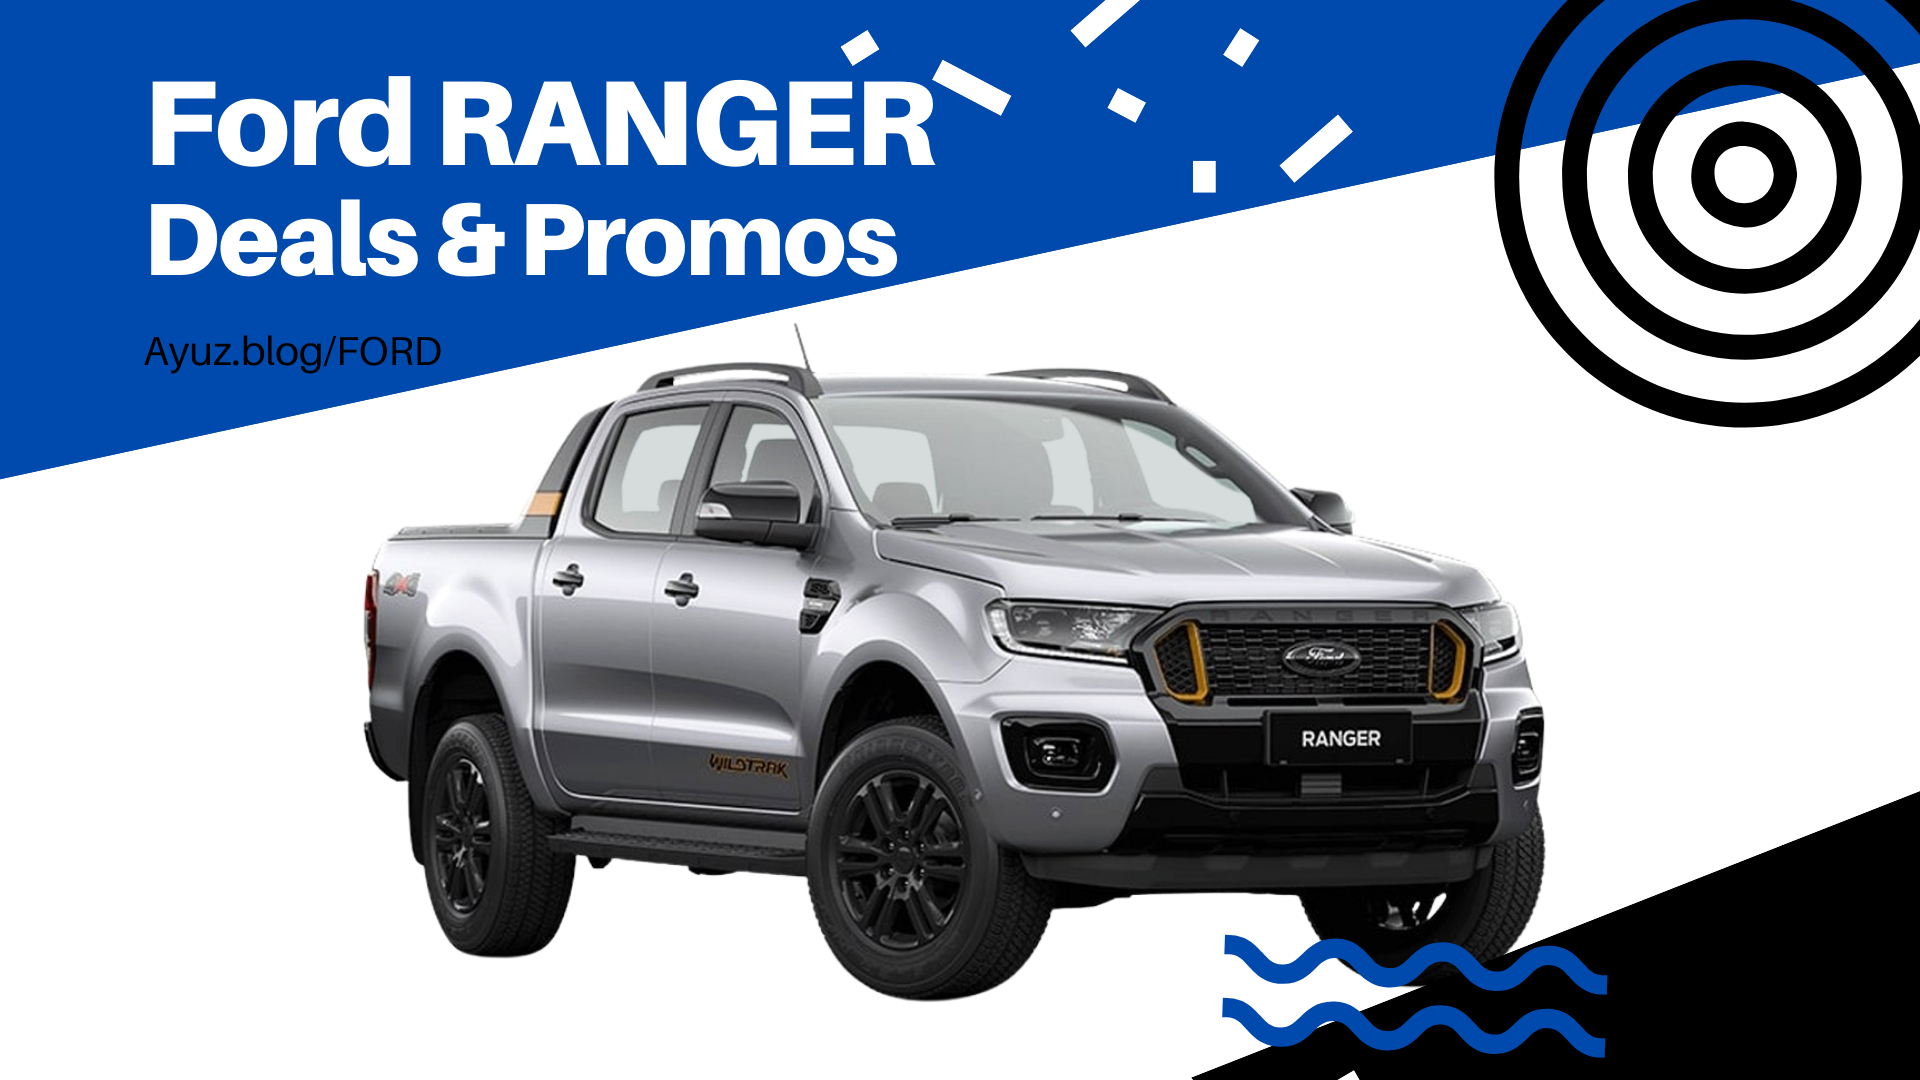 Ford Ranger Deals & Promos in Batangas, Philippines